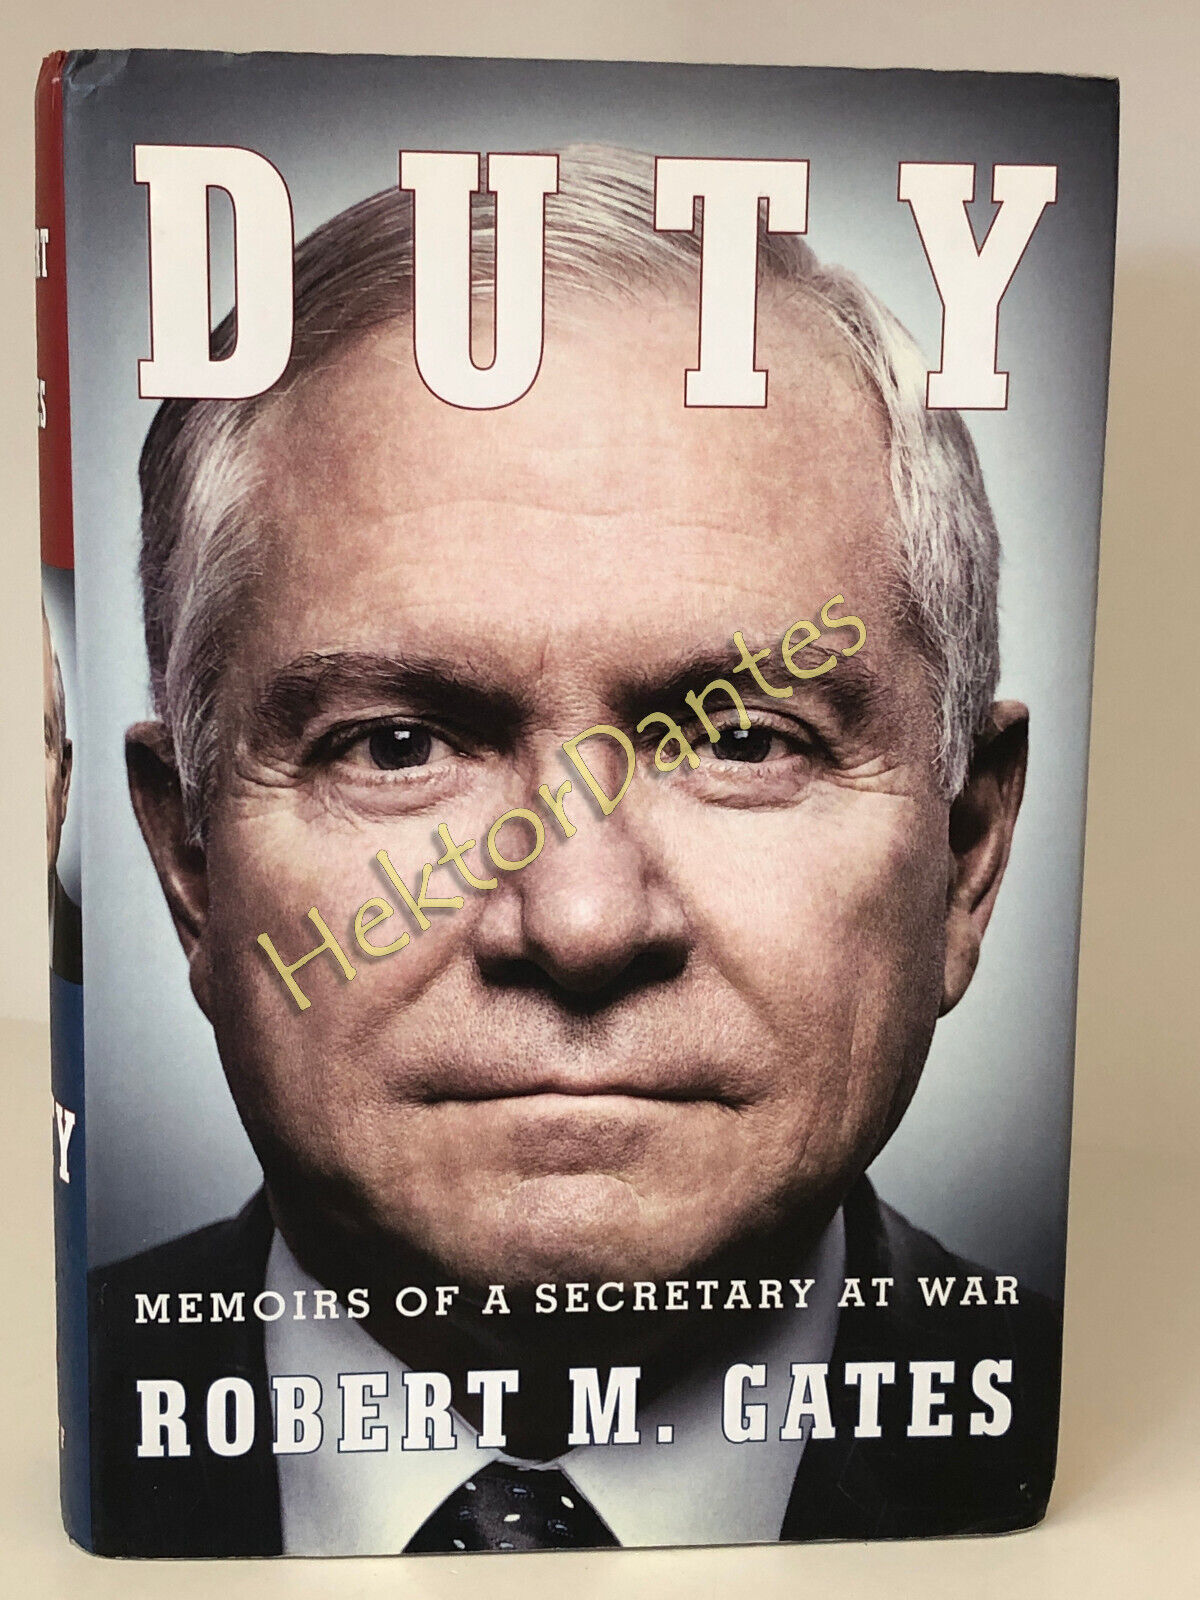 Primary image for Duty: Memoirs of a Secretary at War by Robert M. Gates (2014, Hardcover)